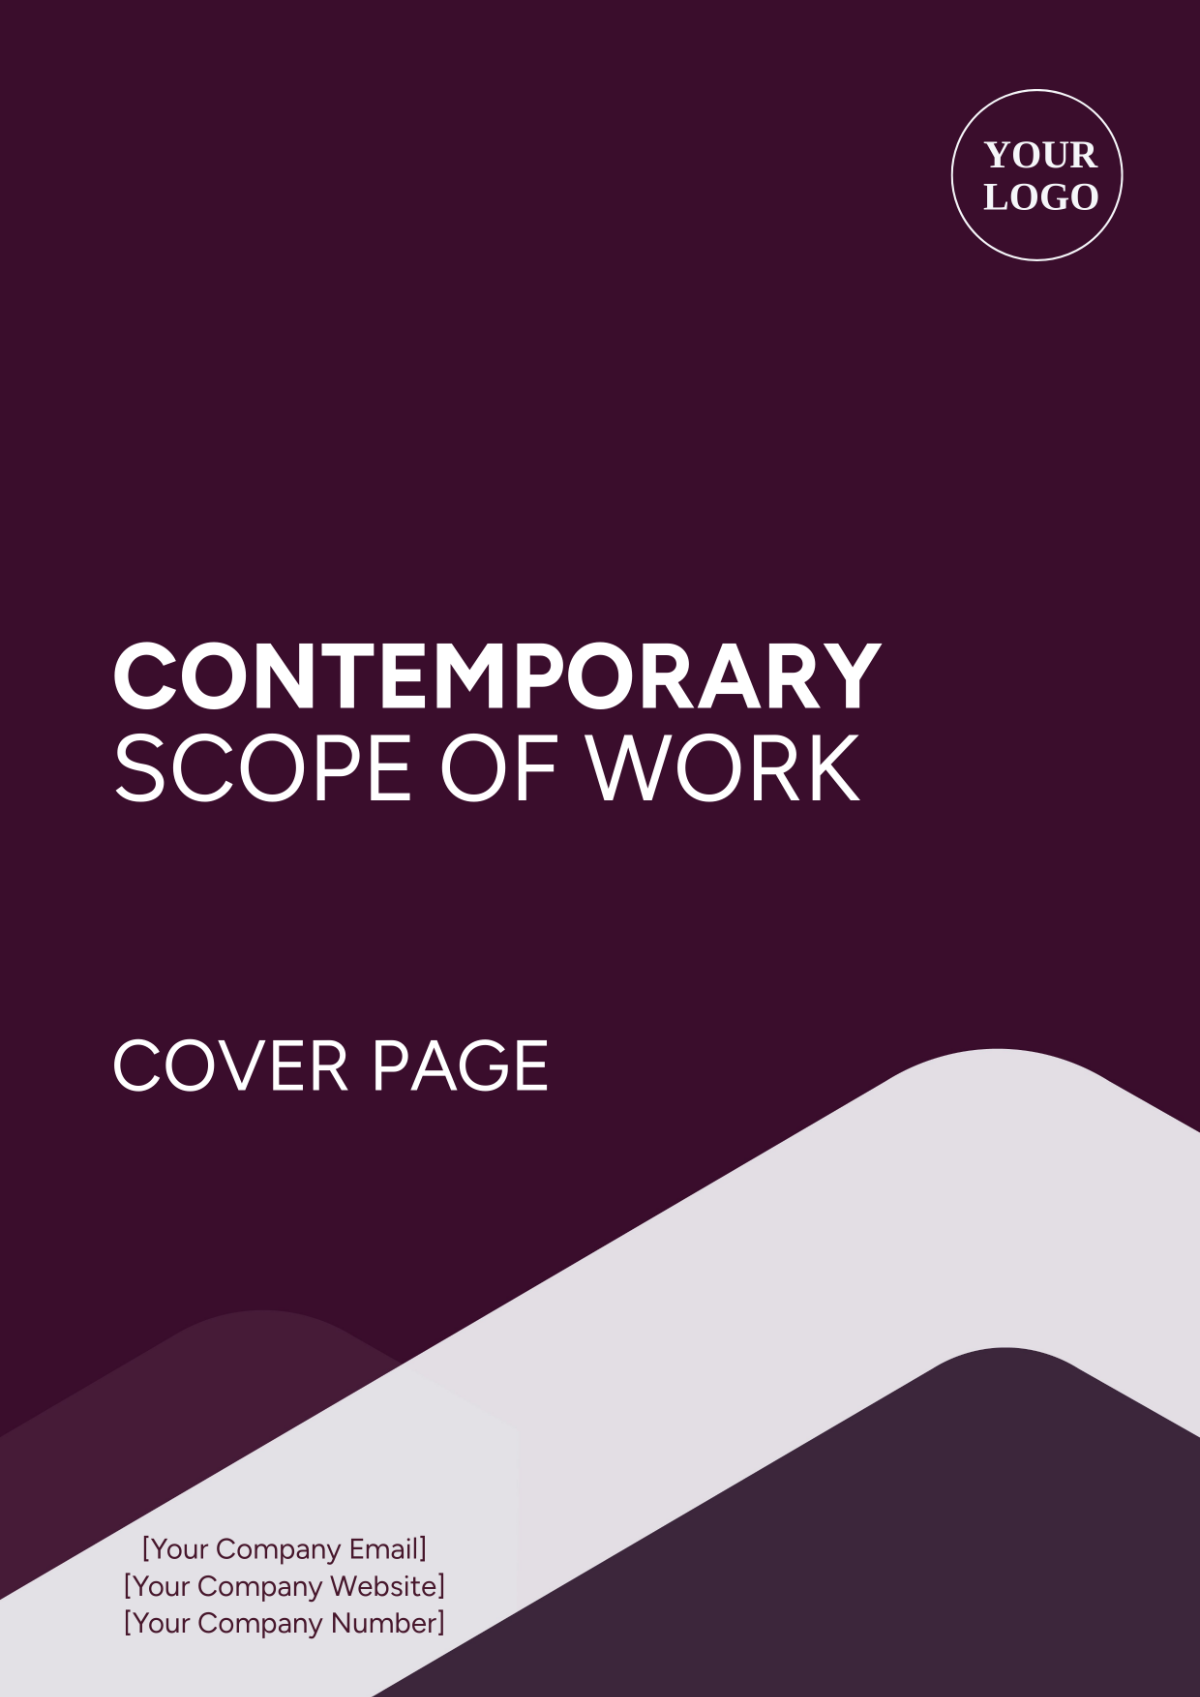 Contemporary Scope of Work Cover Page